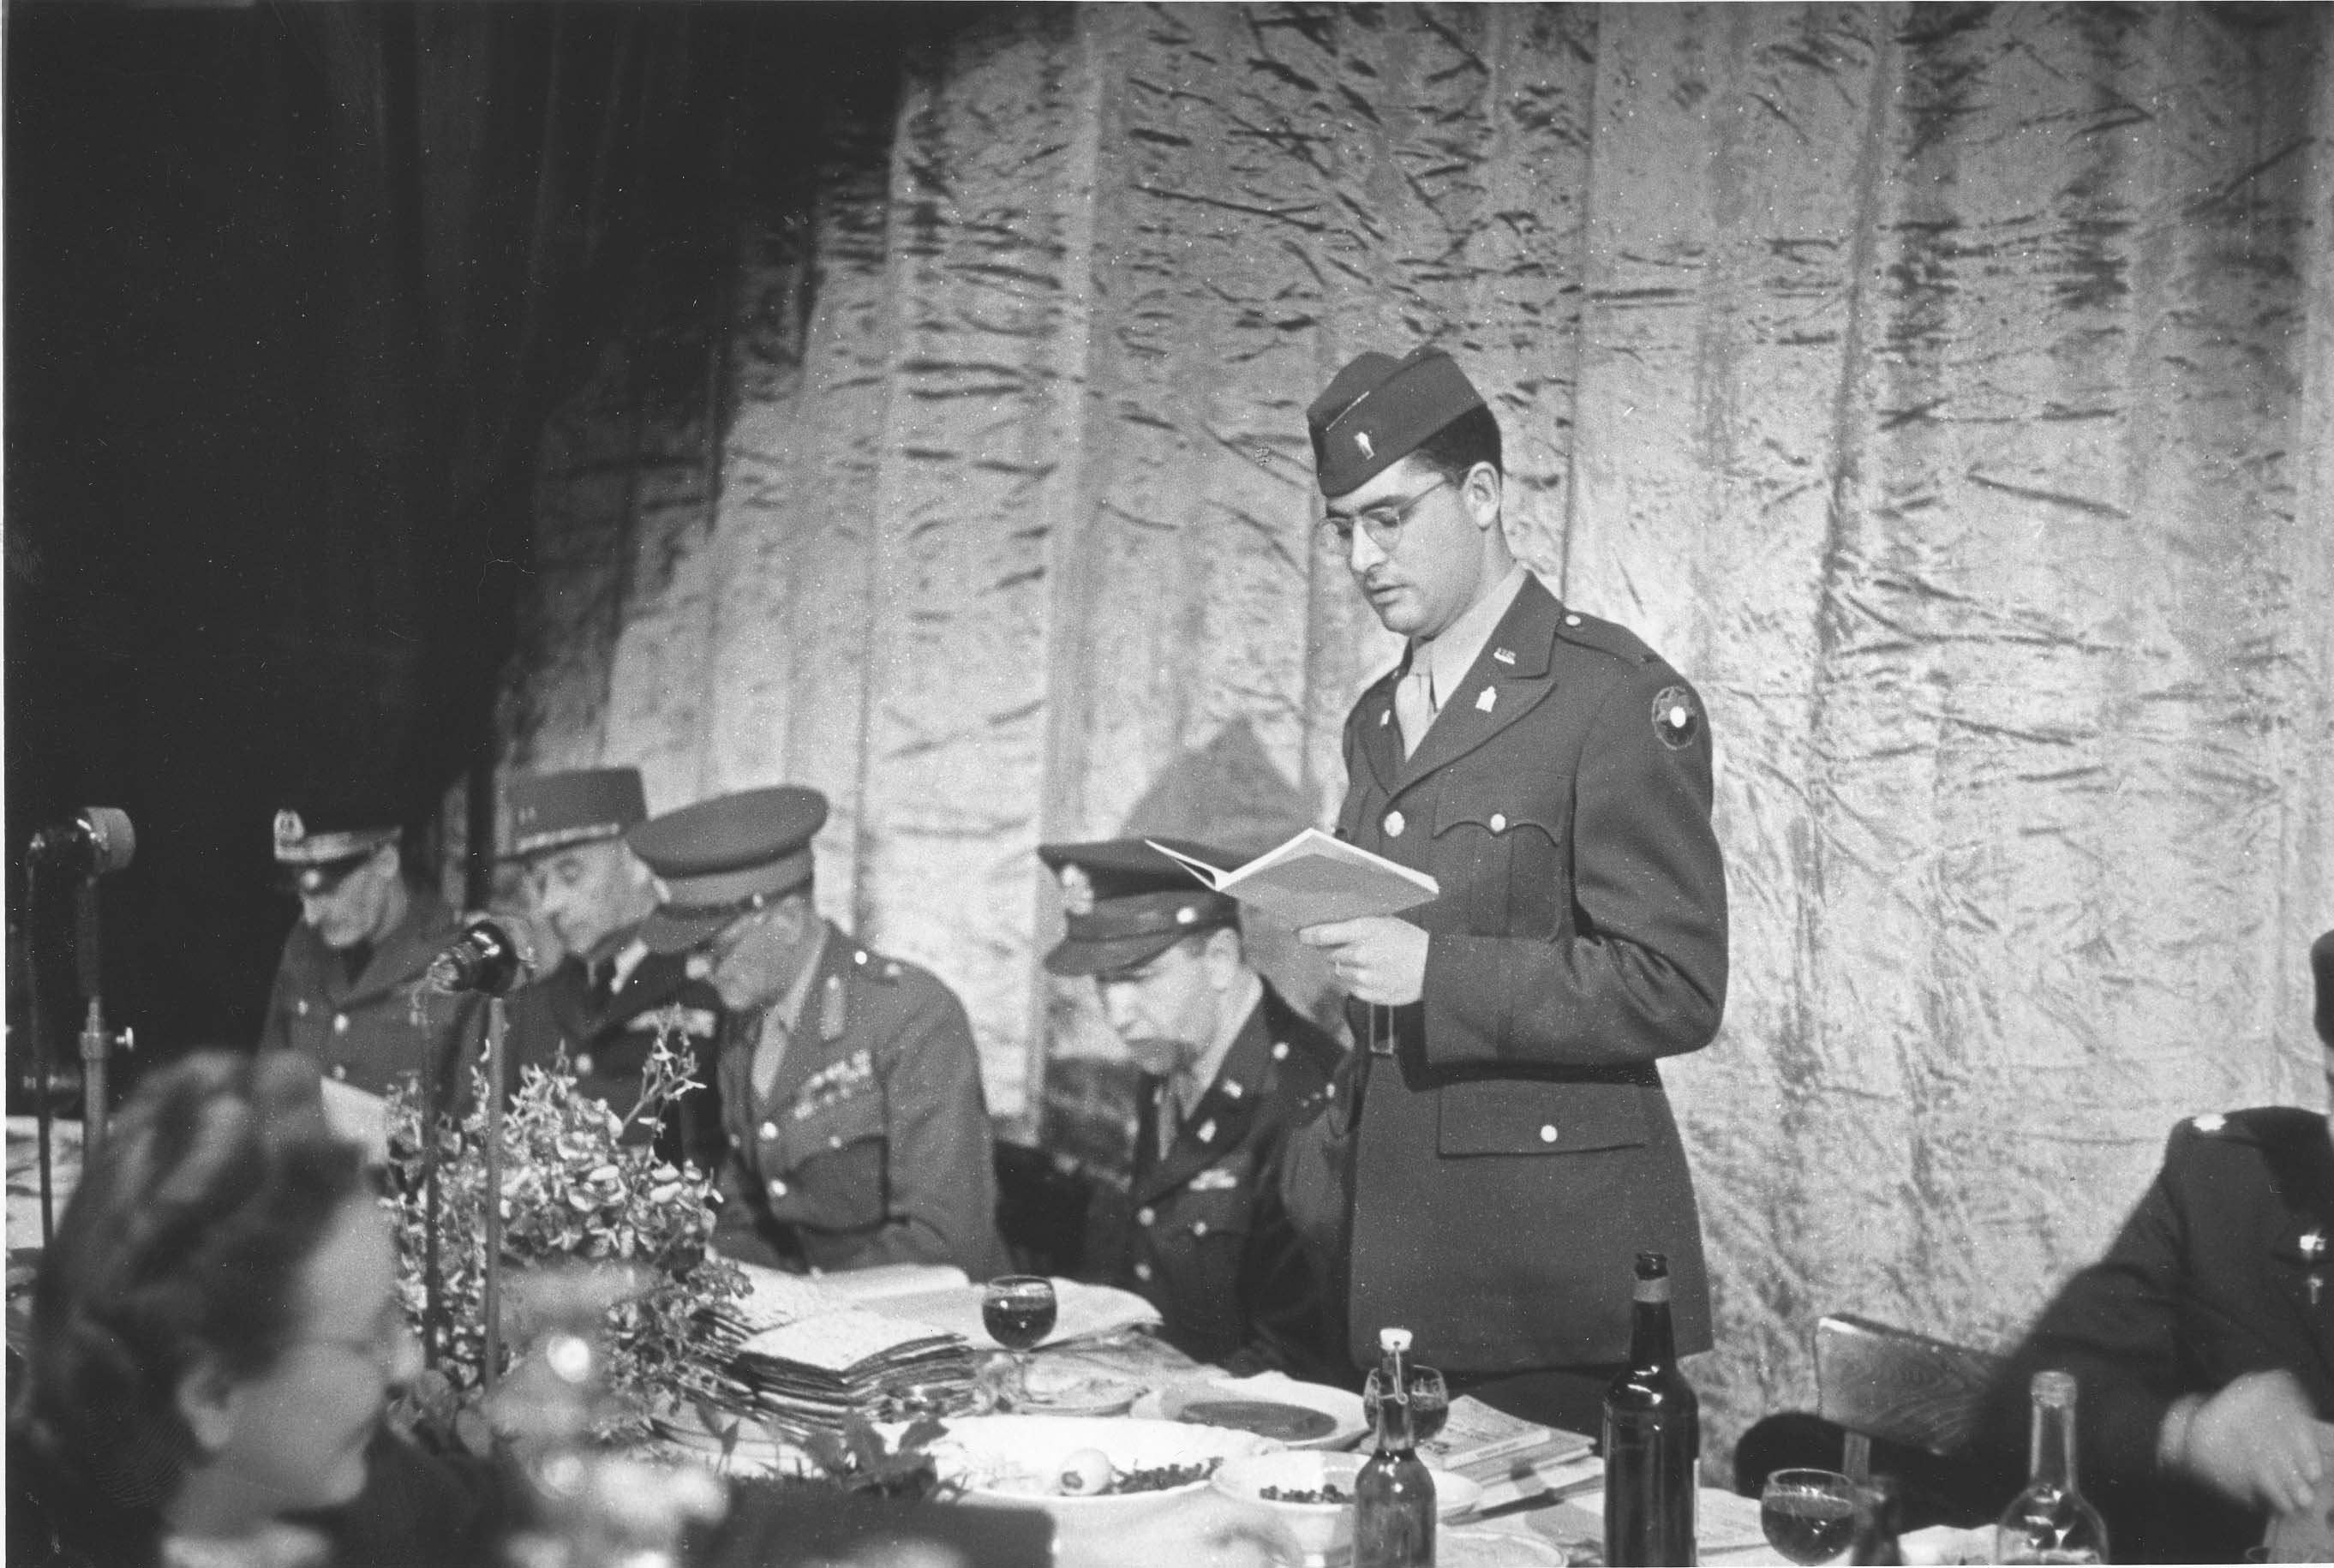 A Passover Seder for Allied soldiers, Berlin, Germany, postwar